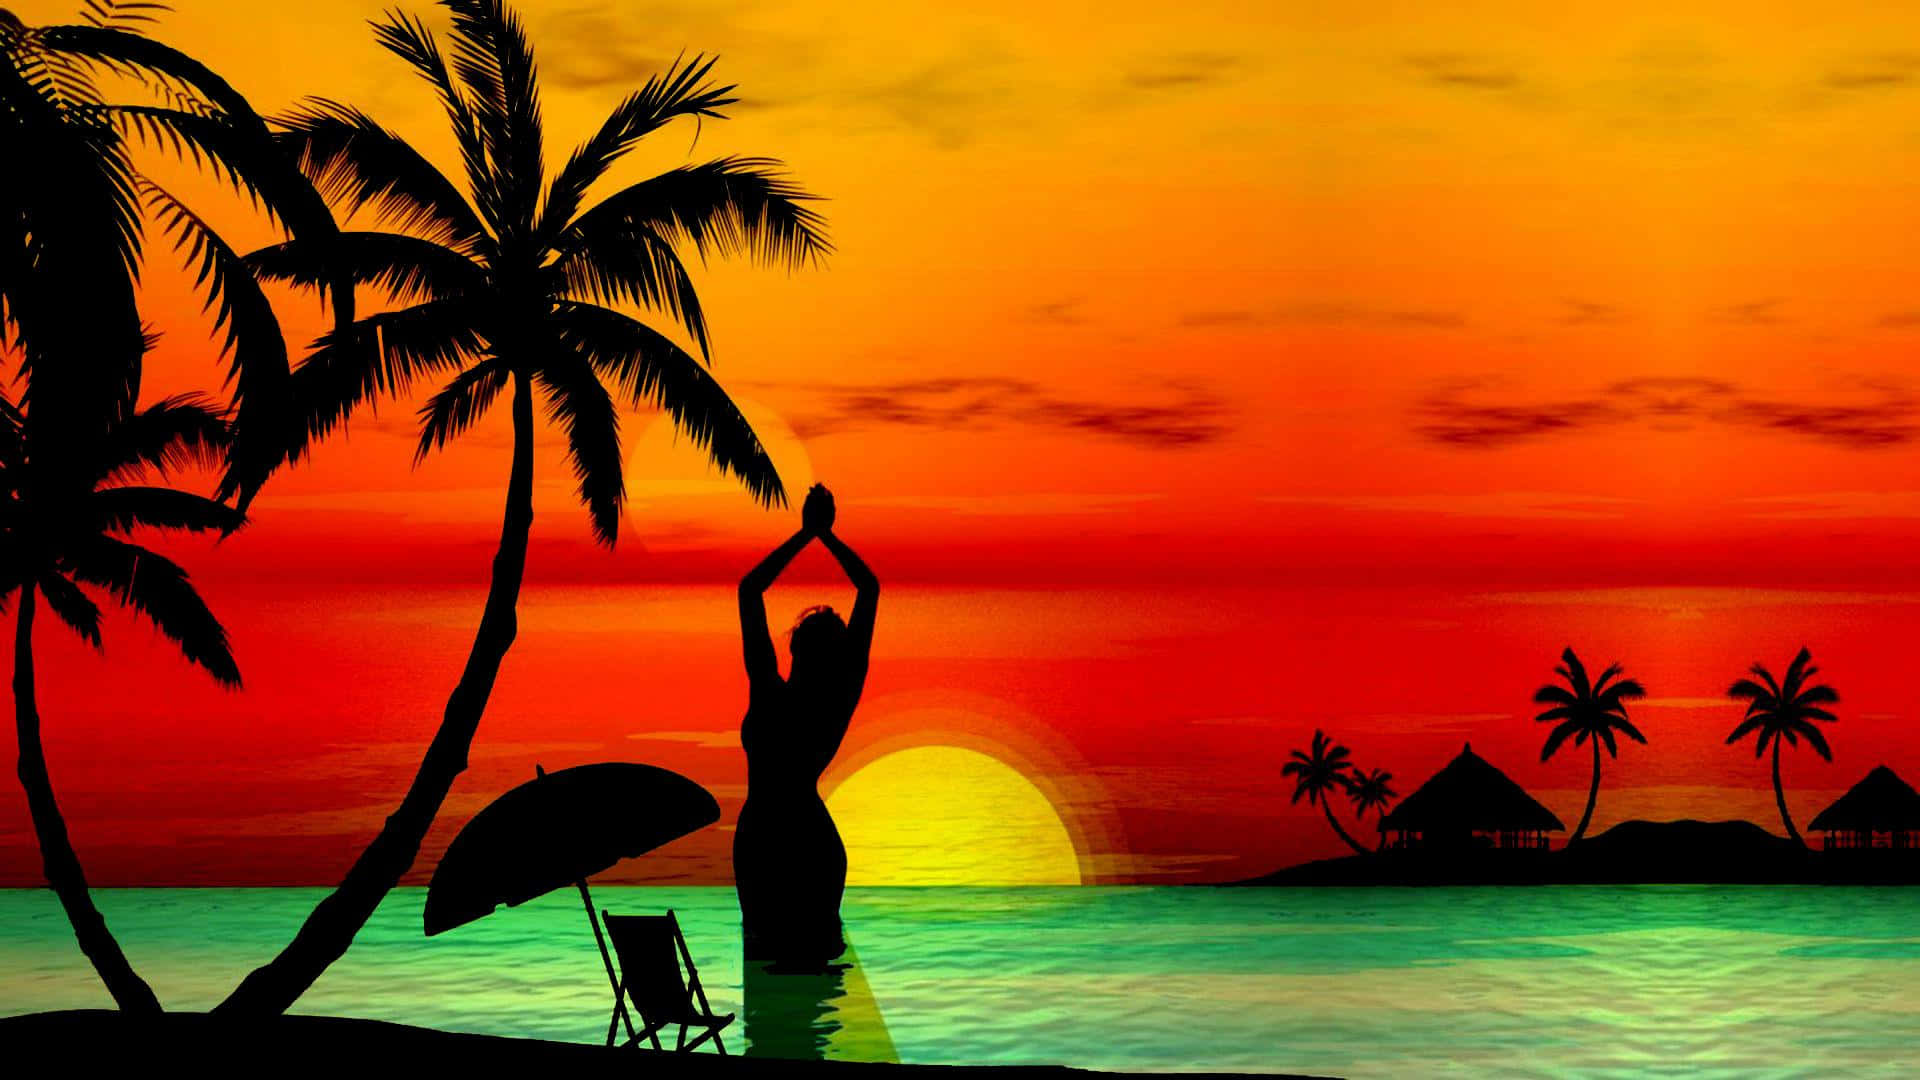 Tropical Sunset Yellow And Orange Sky Wallpaper